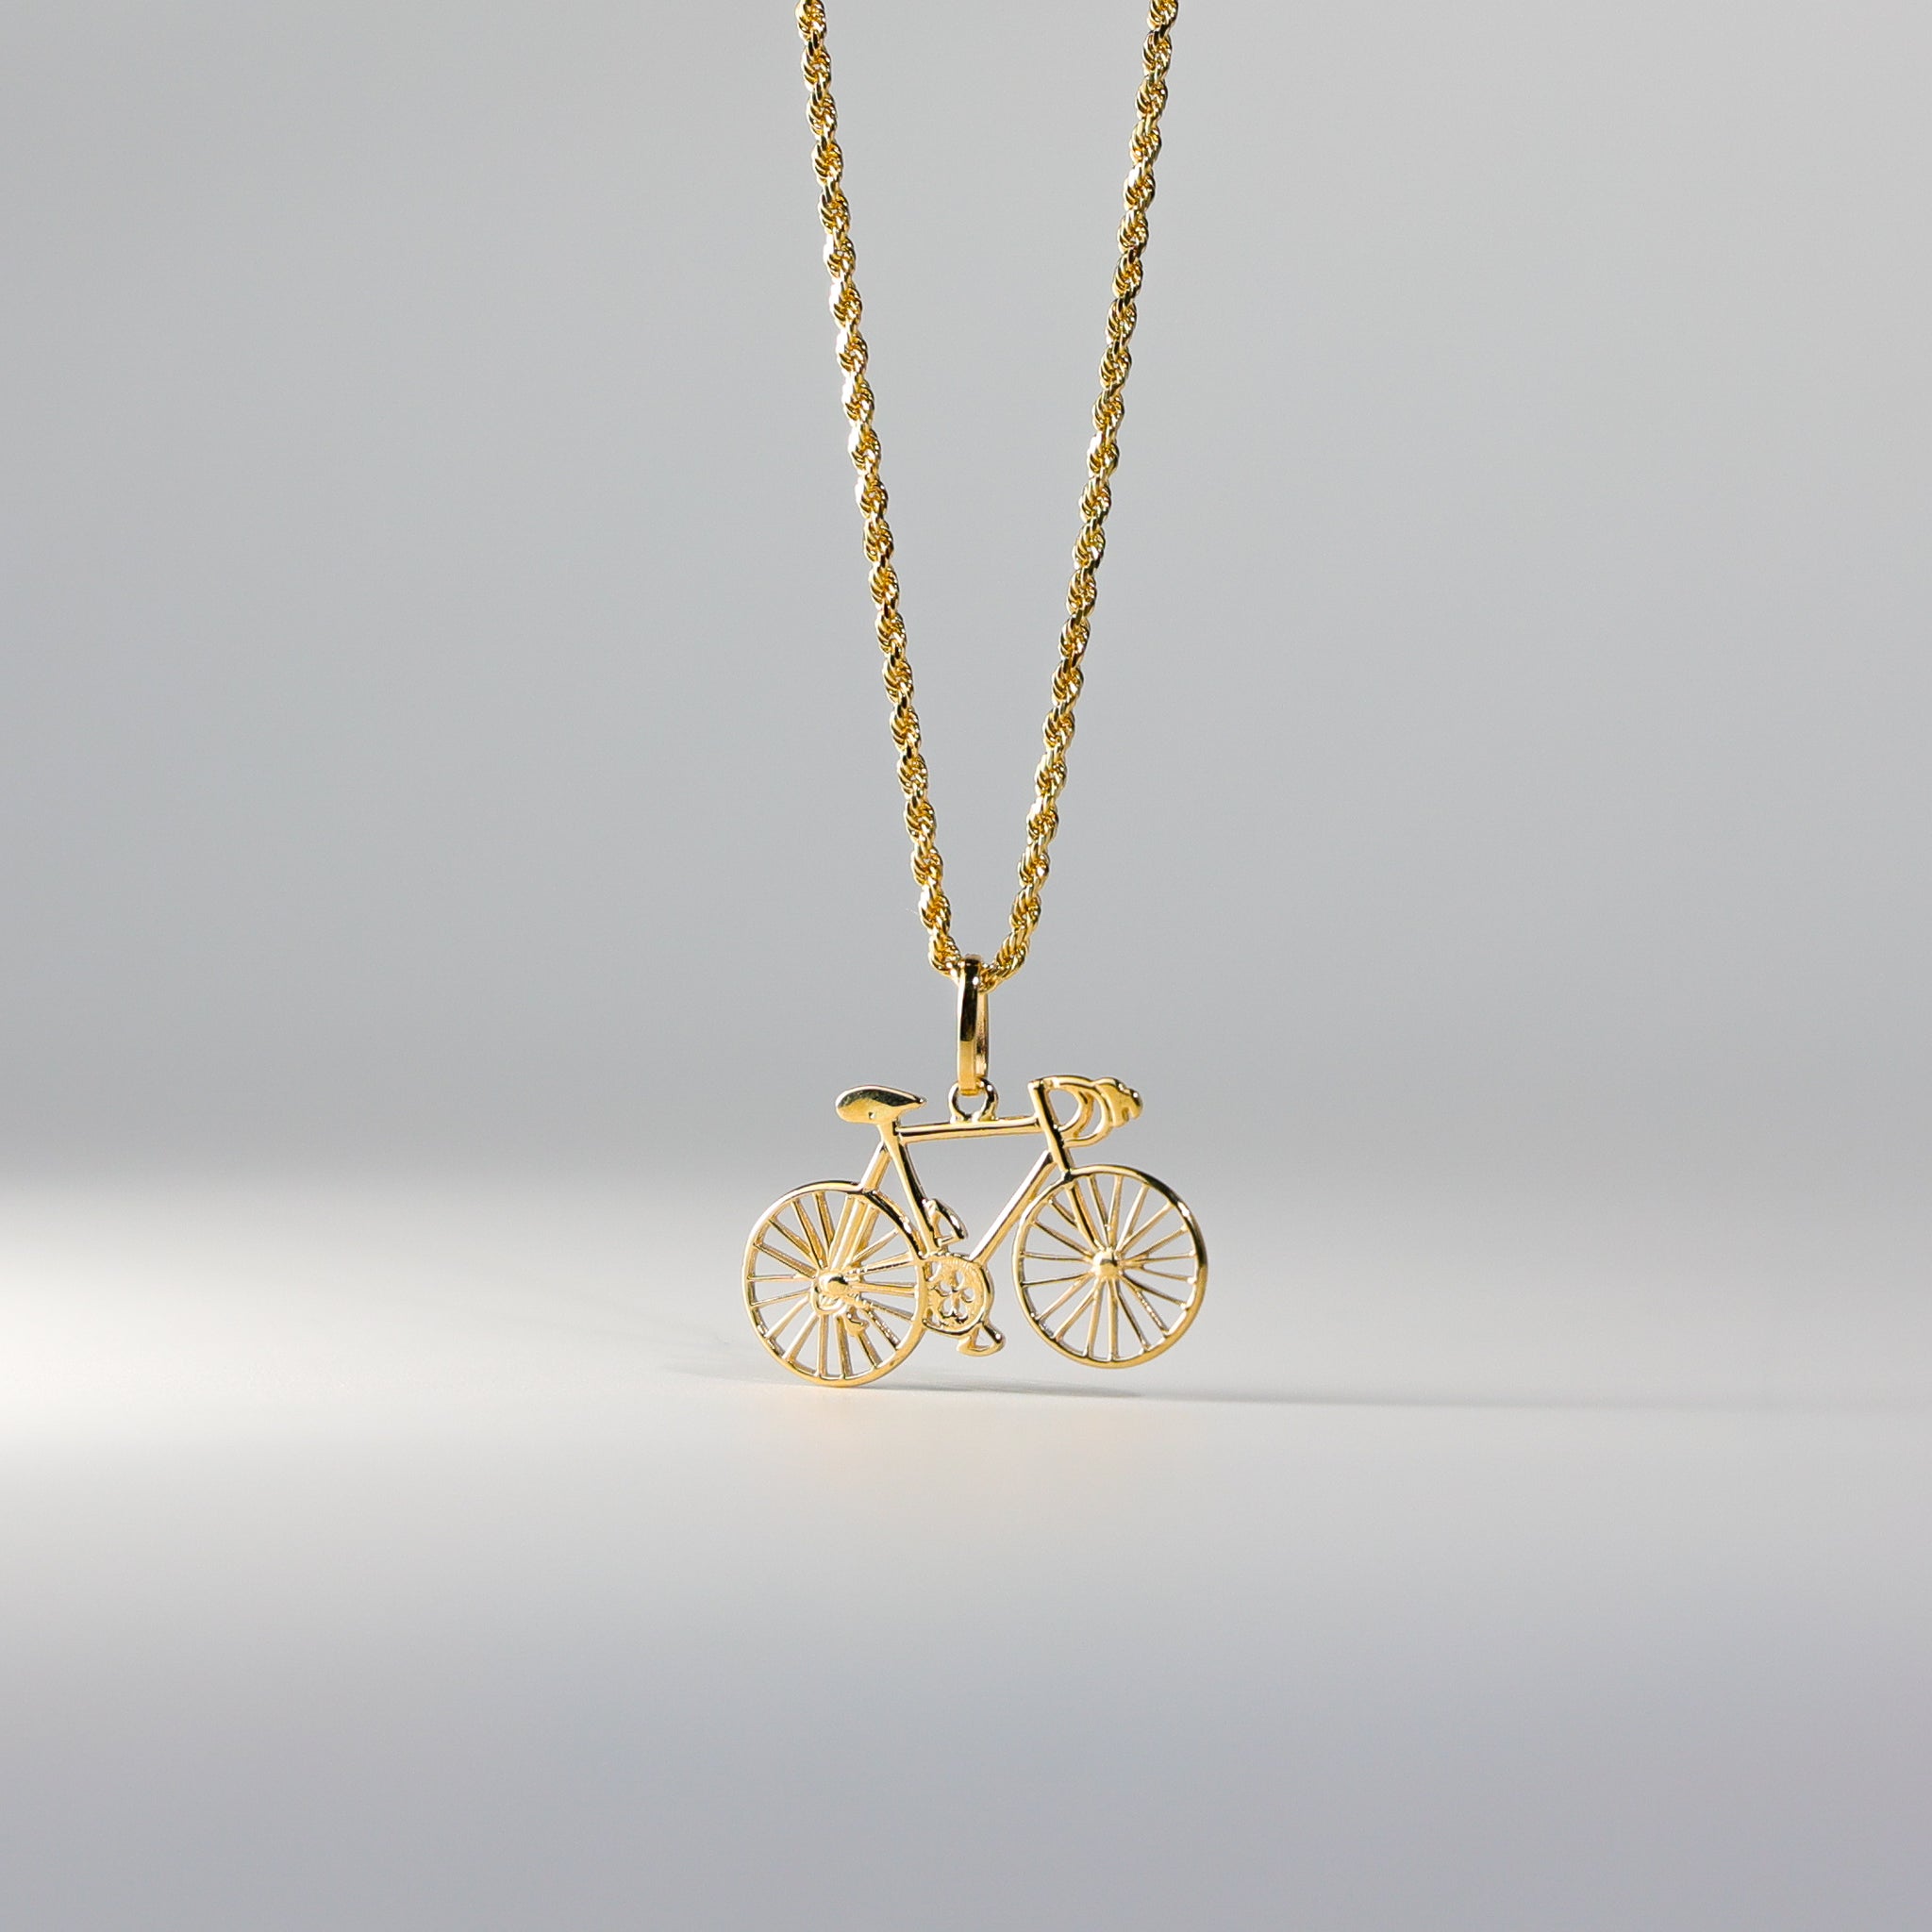 Gold Two Colors Bicycle Pendant Model-2328 - Charlie & Co. Jewelry